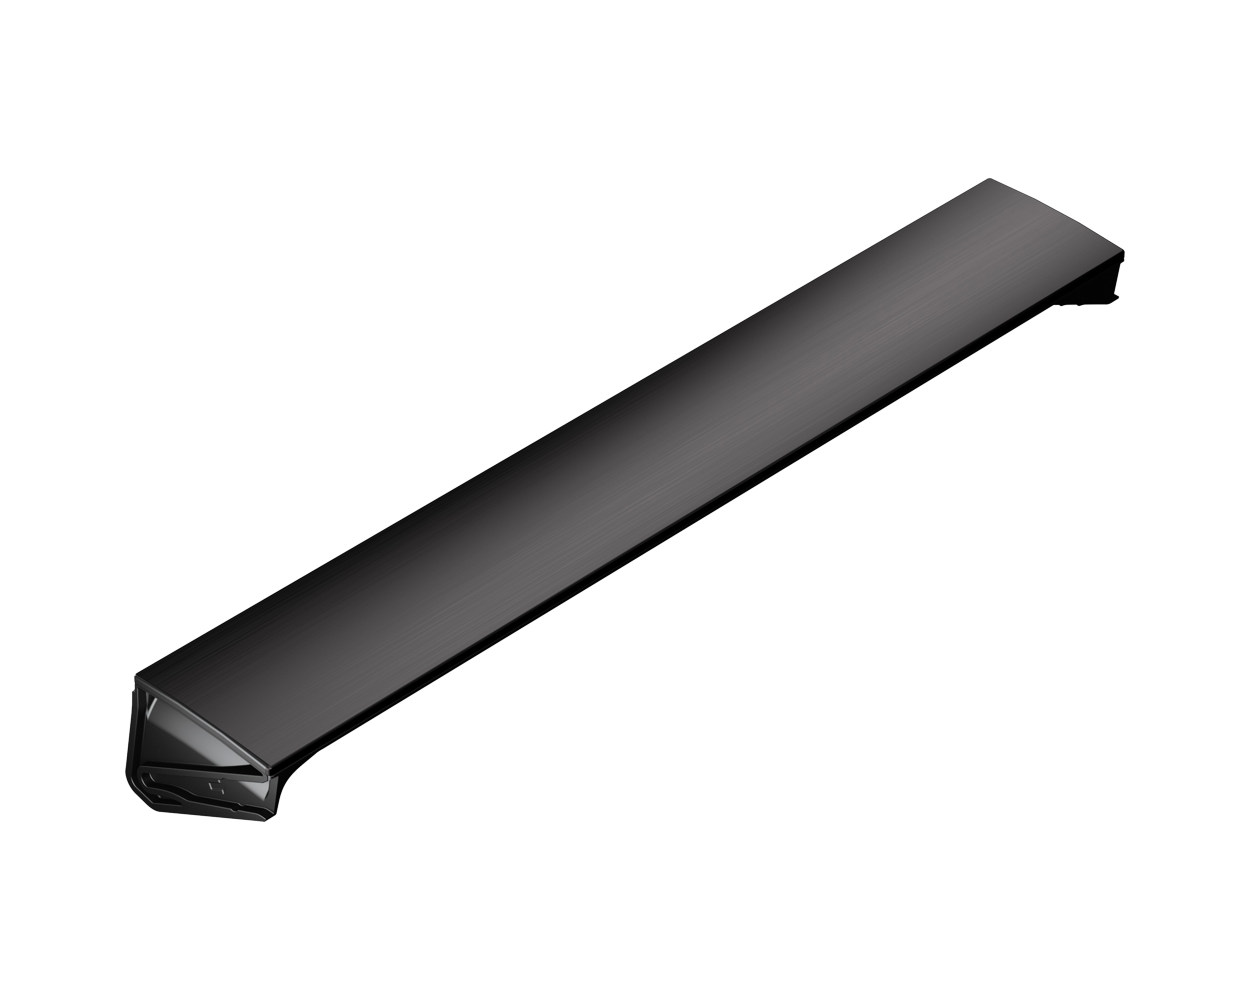 Bora Pro Stainless Steel cover flap in All Black, Sold in the UK by Krieder Studio